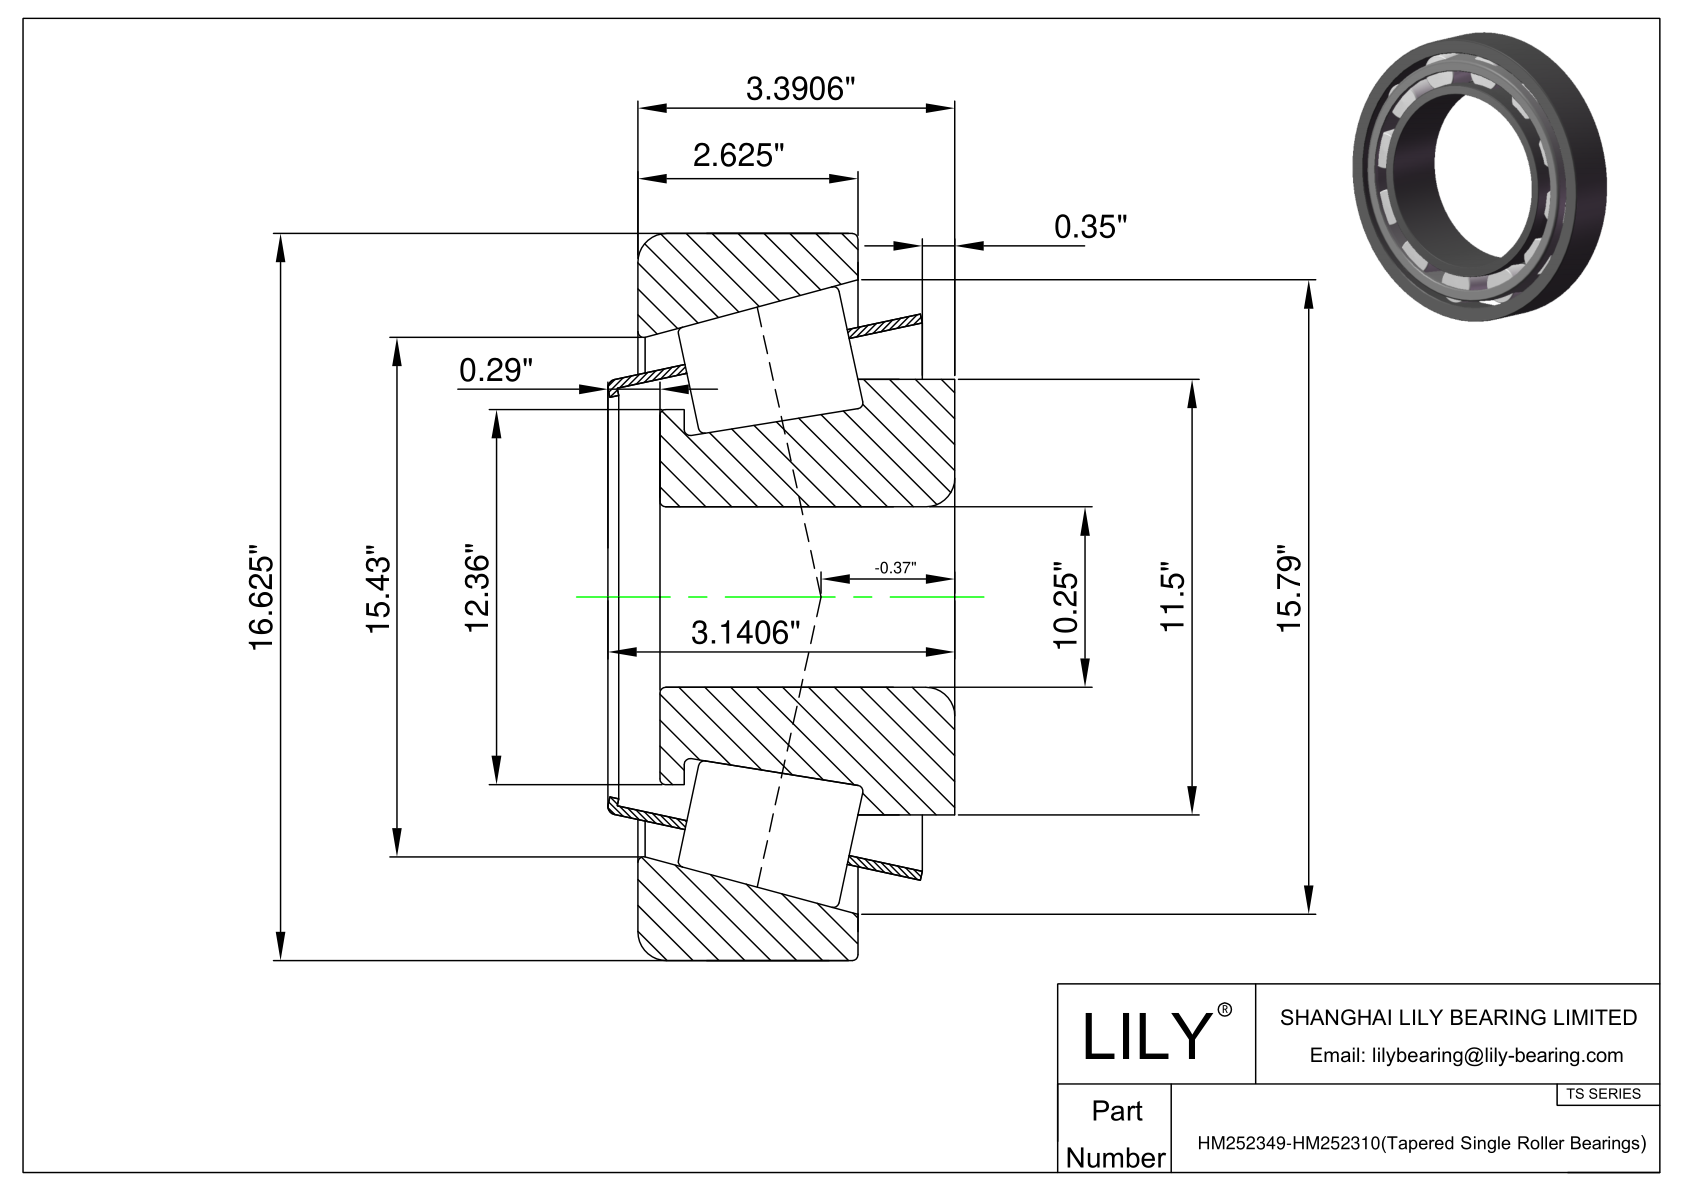 HM252349-HM252310 TS (Tapered Single Roller Bearings) (Imperial) cad drawing